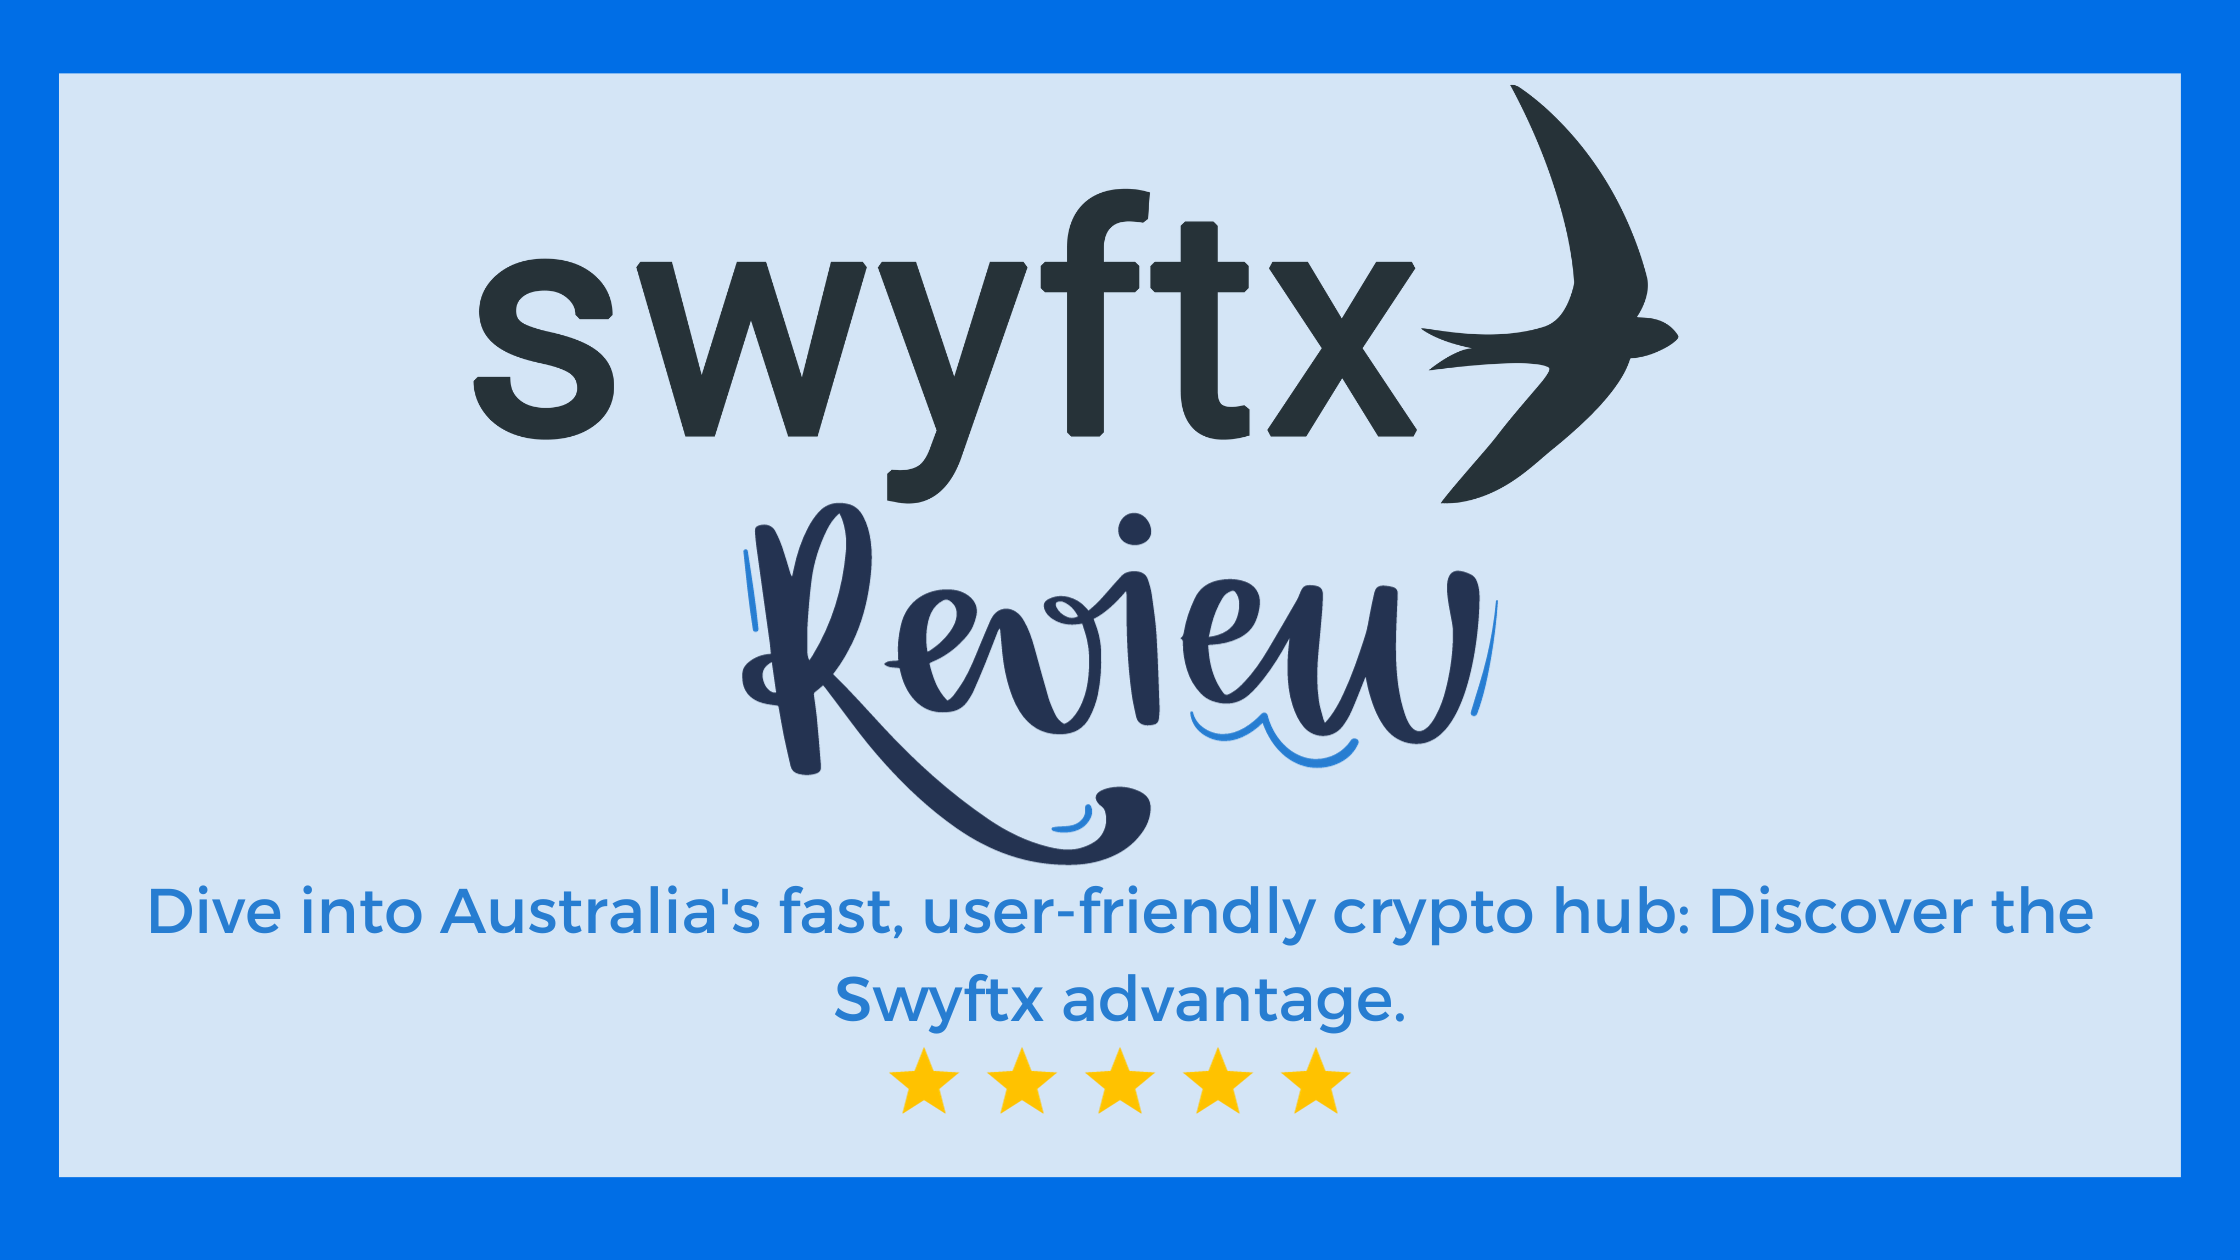 A graphic with the text "Swyftx Review" in bold letters on a blue background, accompanied by a stylized bird logo and five gold stars. Below the title is a tagline that reads: "Dive into Australia's fast, user-friendly crypto hub: Discover the Swyftx advantage.